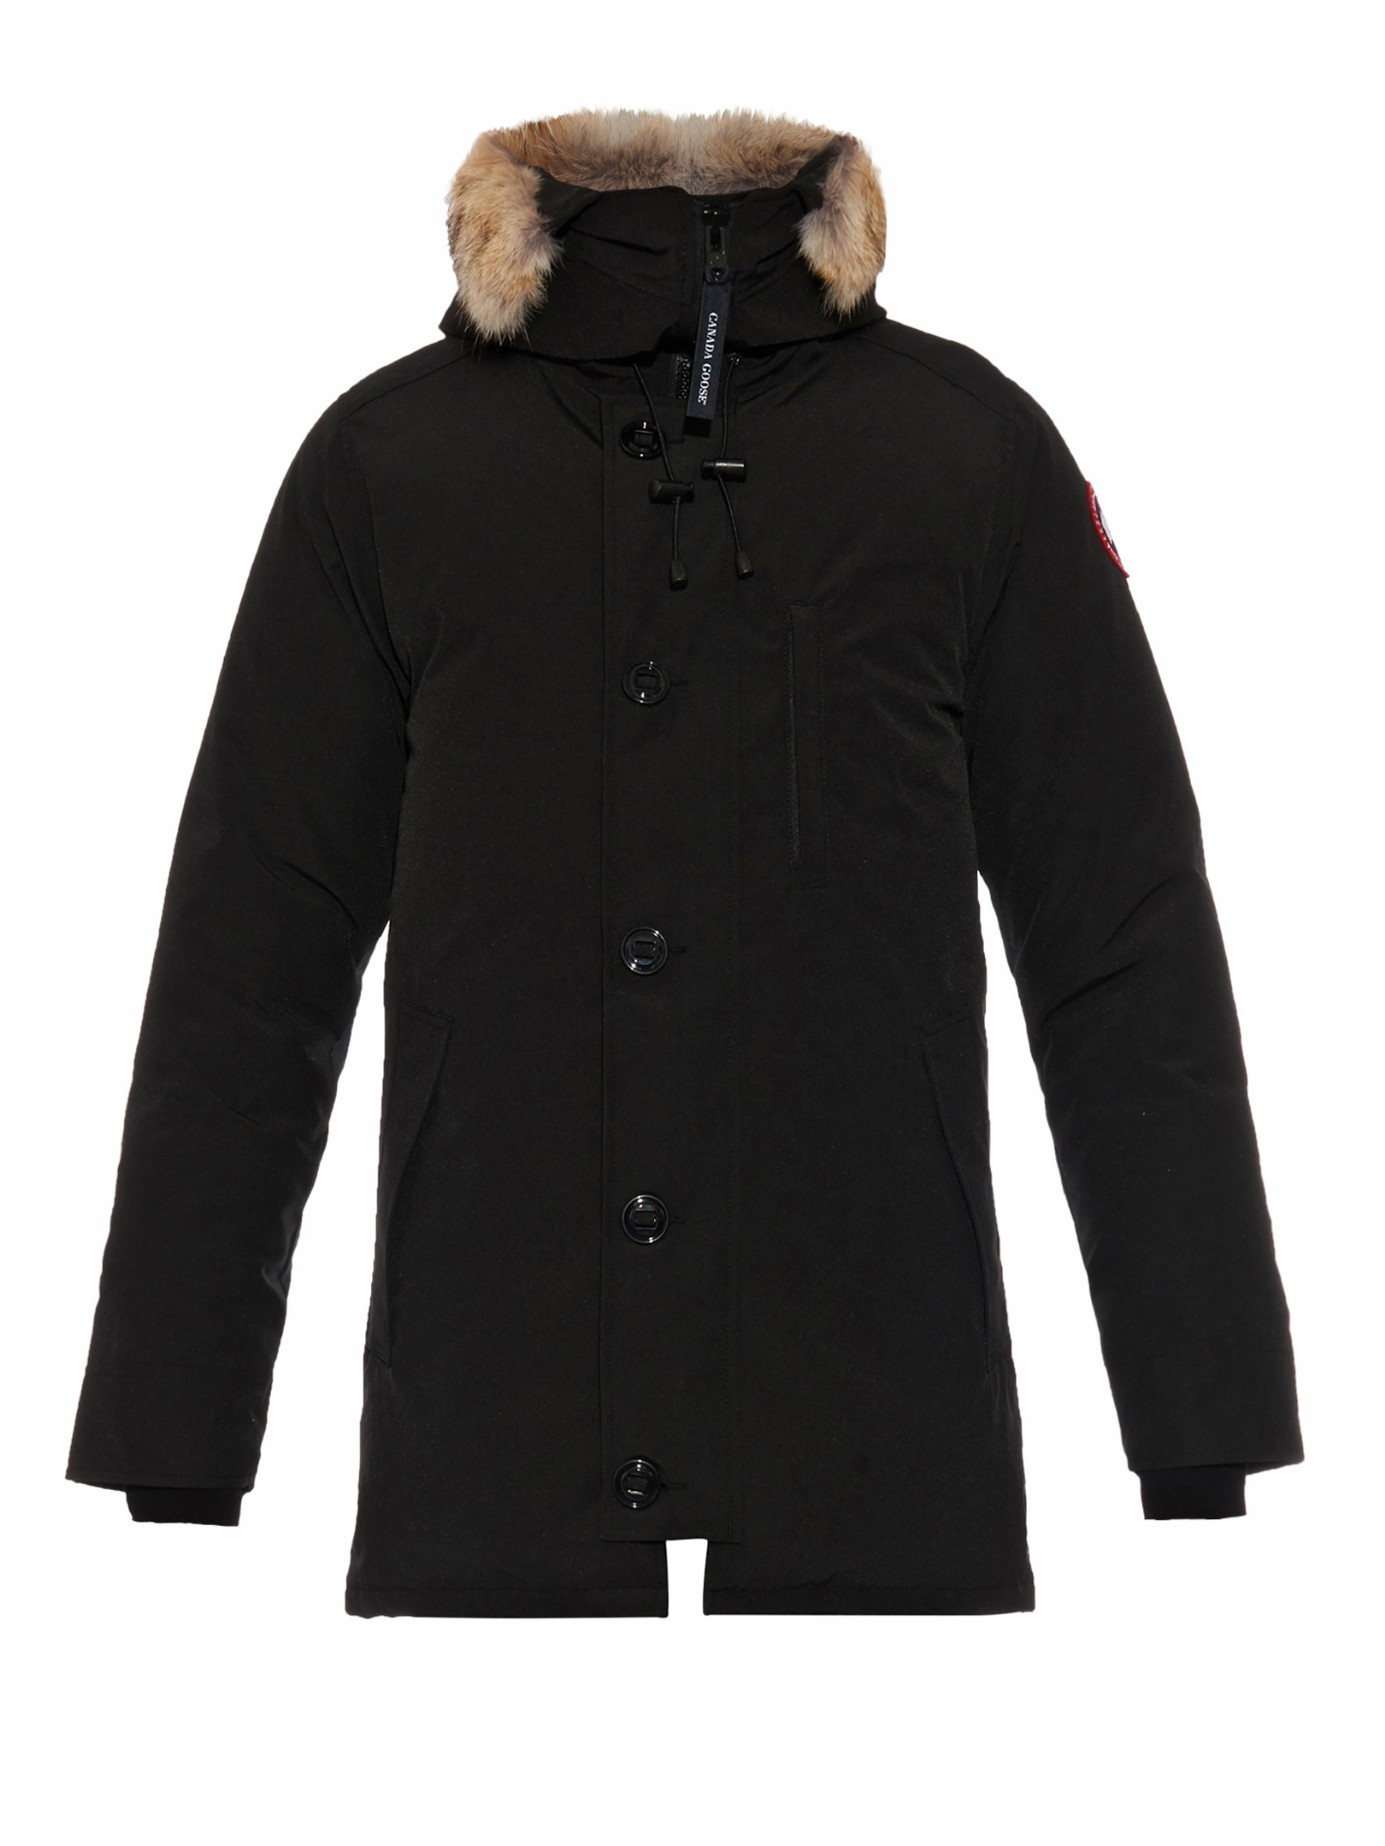 Canada Goose Chateau Fur-trimmed Down Parka in Black for Men - Lyst